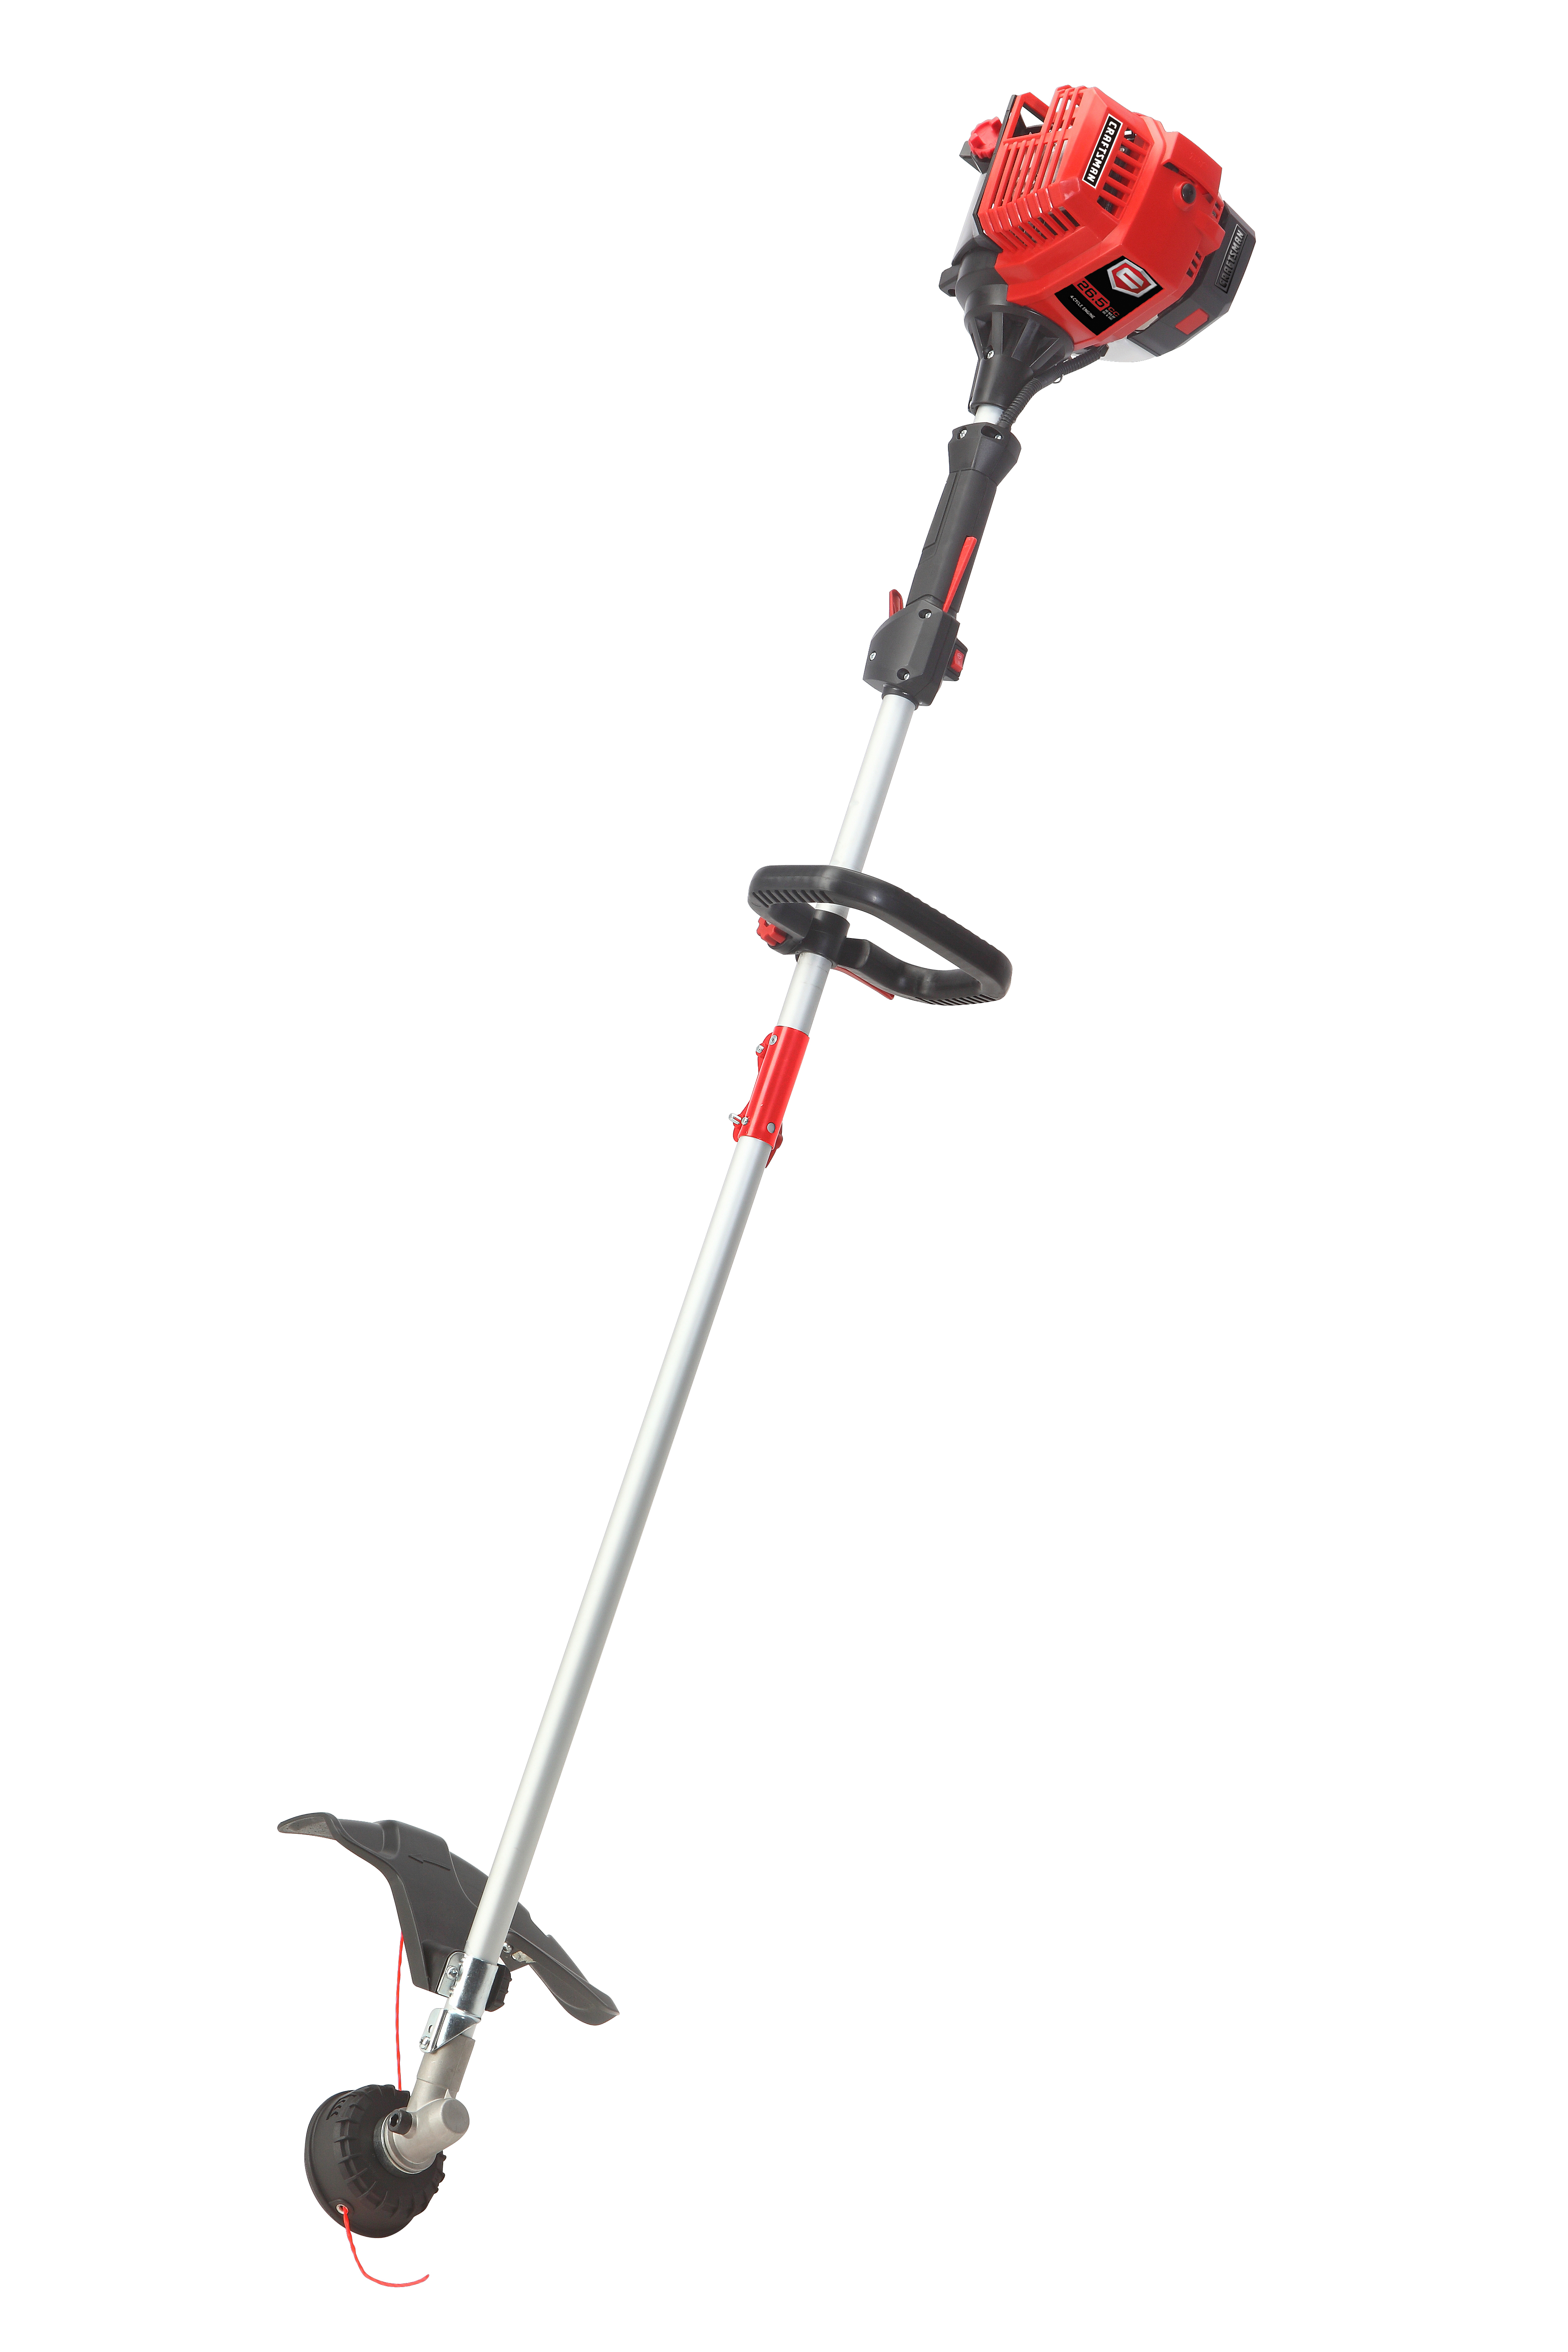 craftsman 4 cycle weed trimmers